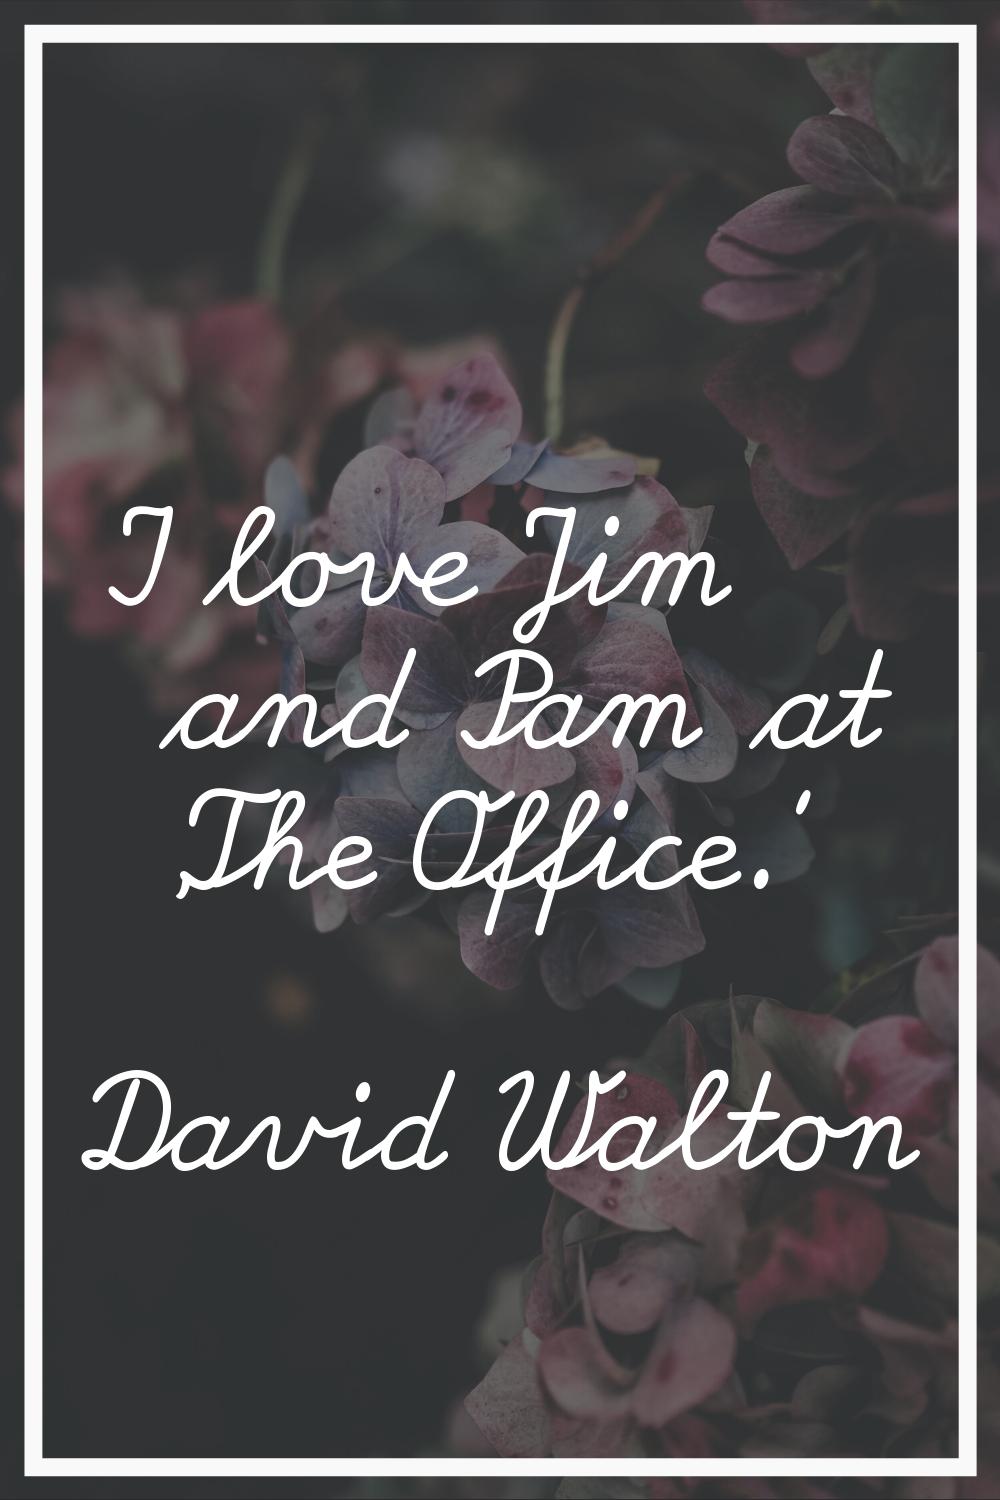 I love Jim and Pam at 'The Office.'